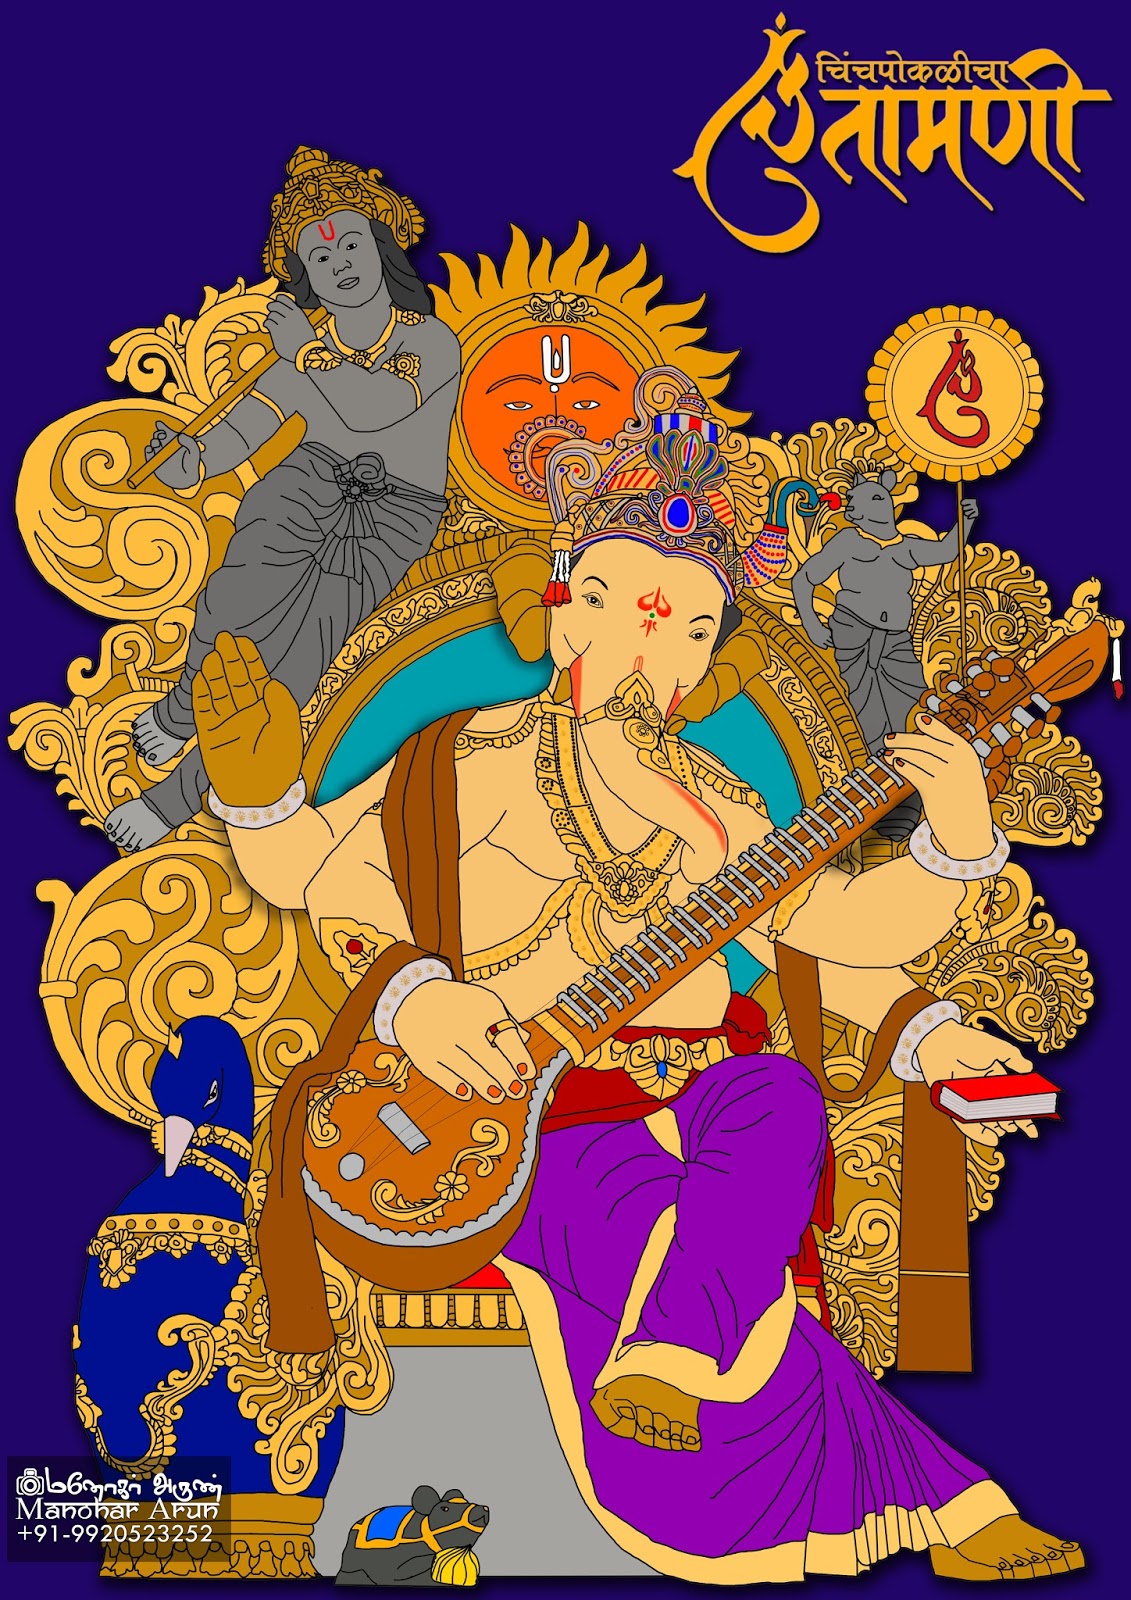 Chinchpokli Cha Chintamani Hd Wallpaper Wallpaper Galaxy The chintamani app is for all chinchpoklicha chintamani devotees with everything about all social and cultural events, news, user ph. chinchpokli cha chintamani hd wallpaper